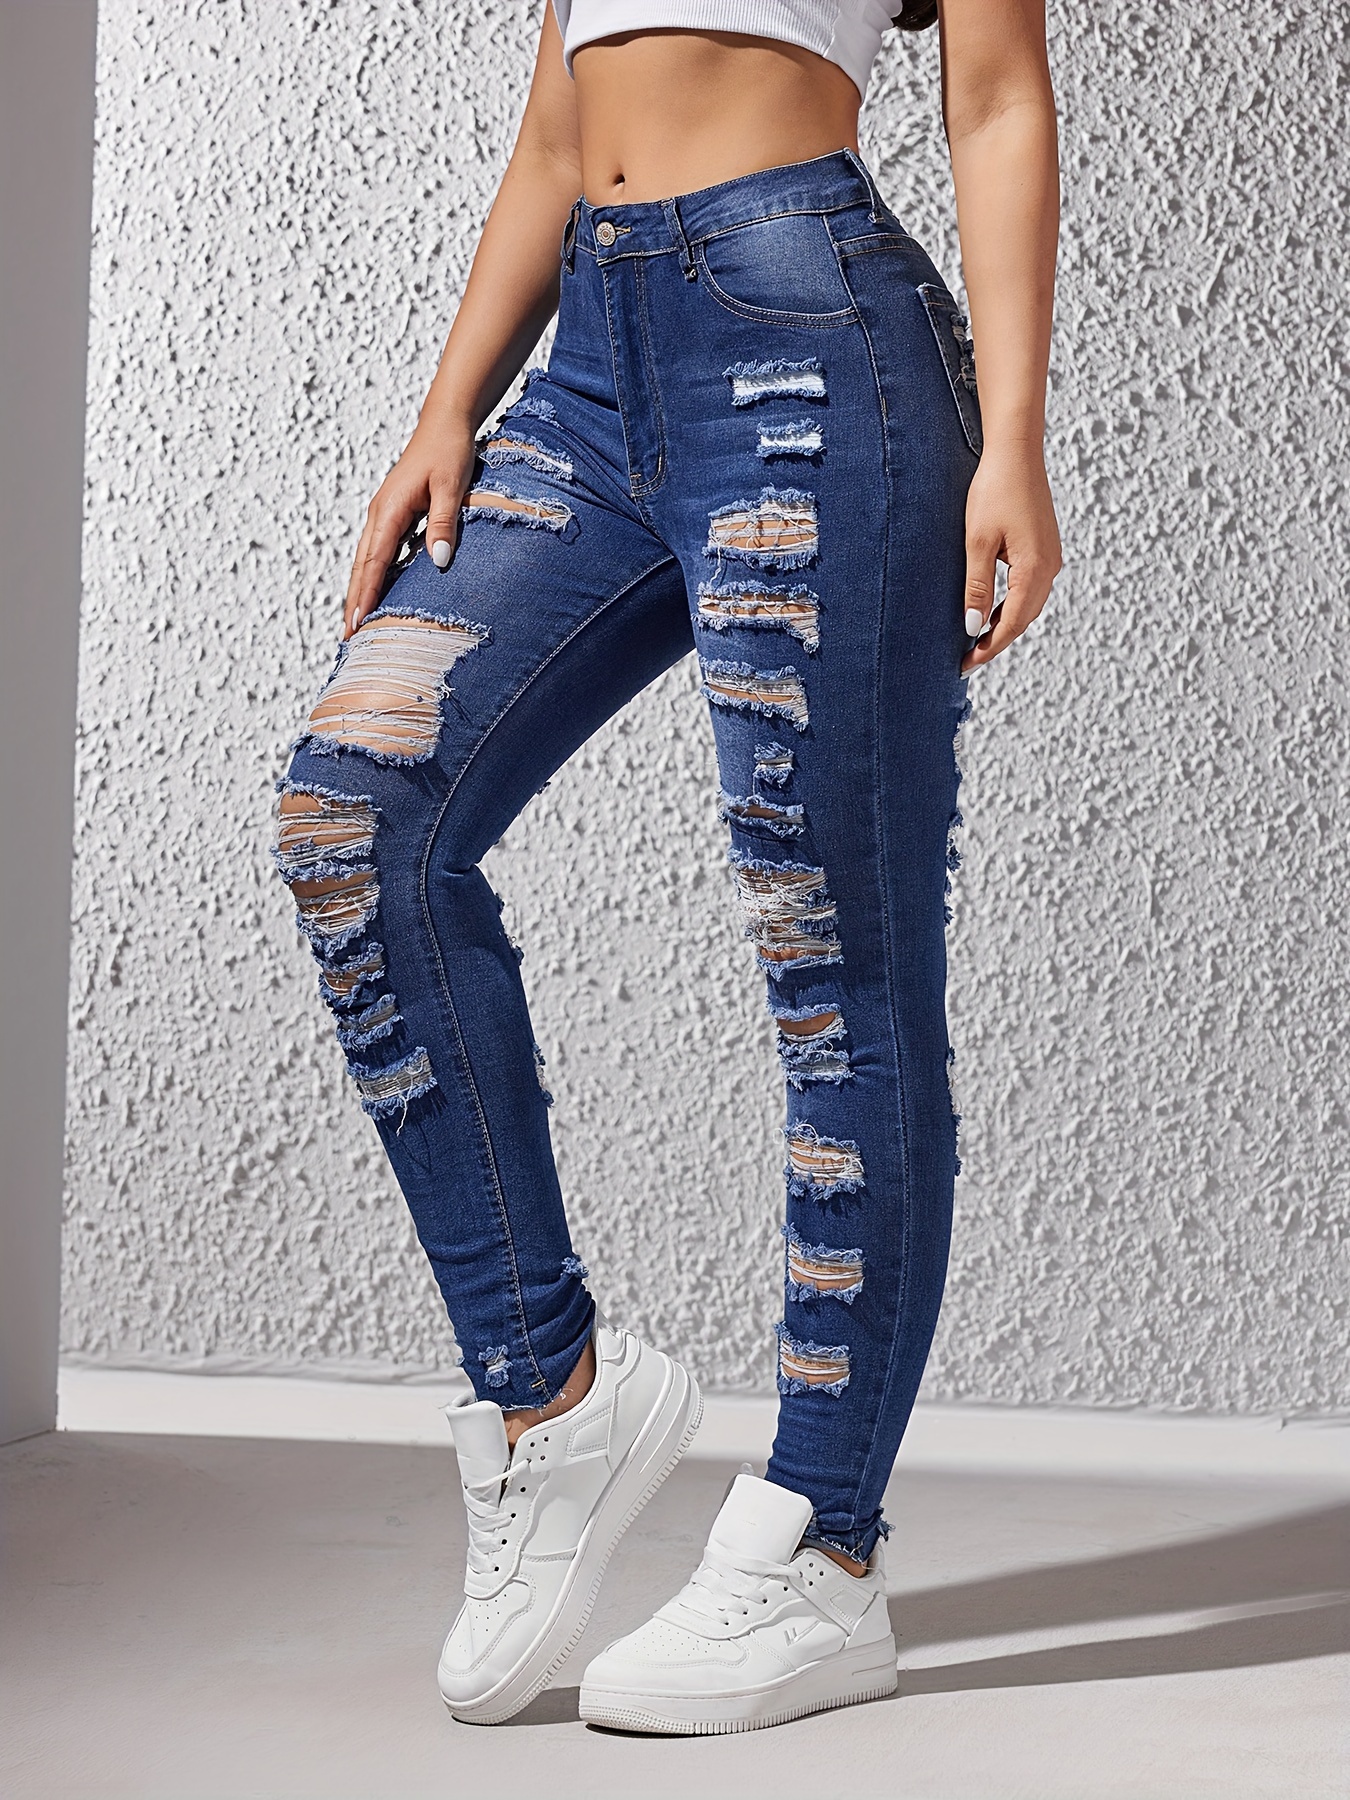 High Rise Distressed Jeans Blue Jeans ripped stretch denim tight fitting  jeans 